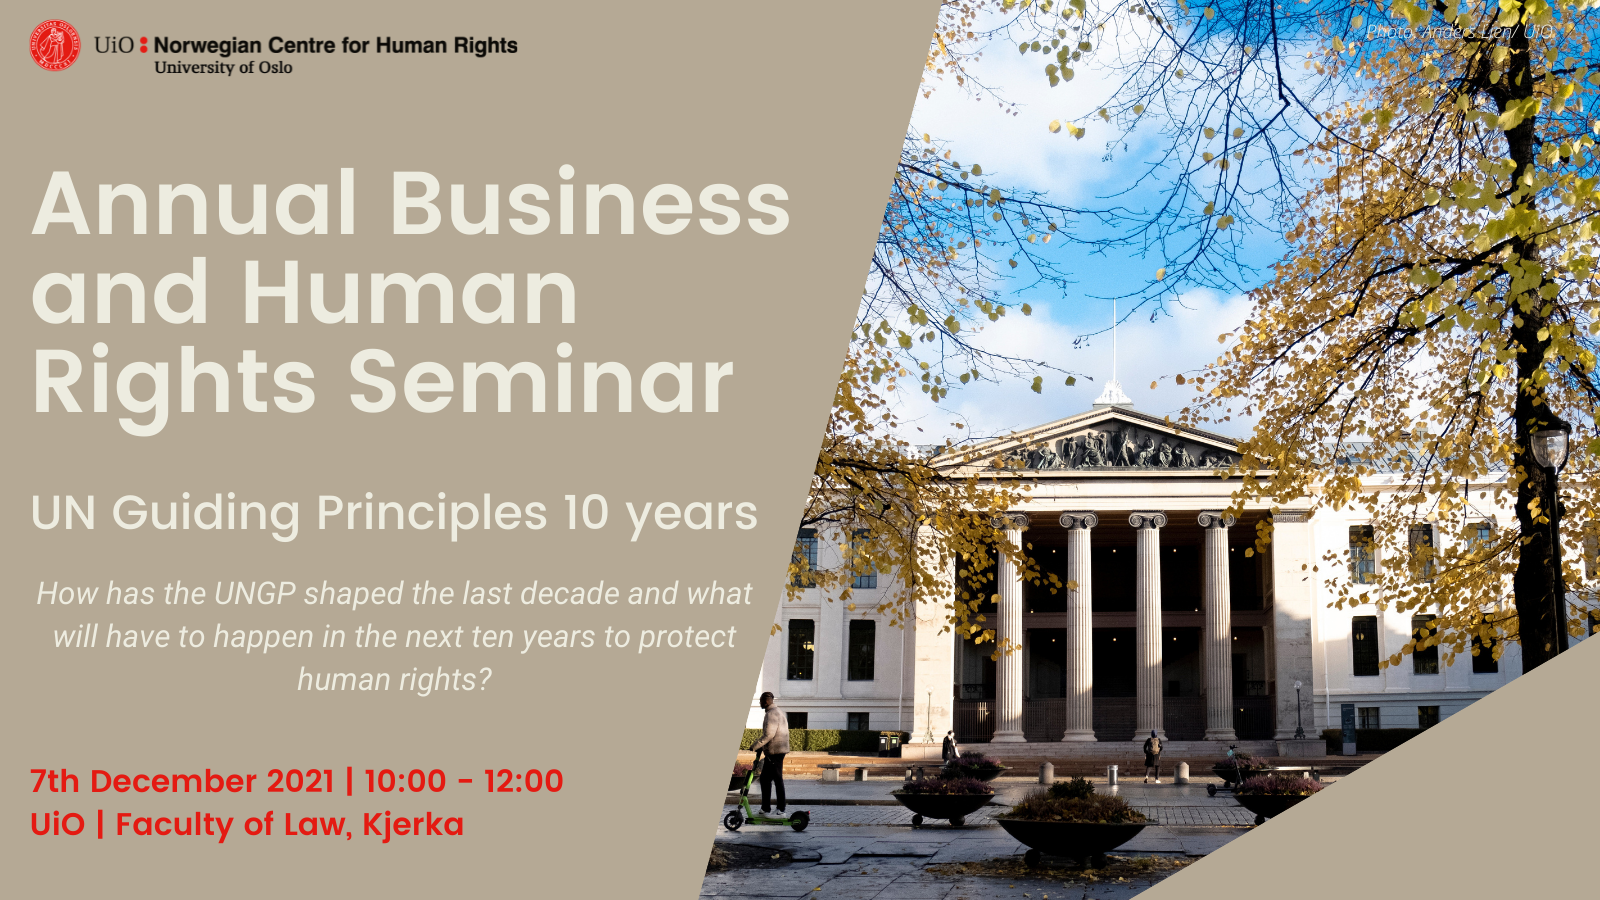 Poster for the event with a picture of the University. The text says: Annual Business and Human Rights Seminar. UN Guiding Principles 10 years. How has the  UNGP shaped the last decade and what will have to happen in the next 10 years to protect human rights? 7th December 2021, 10:00-12:00, UiO, Faculty of Law, Kjerka